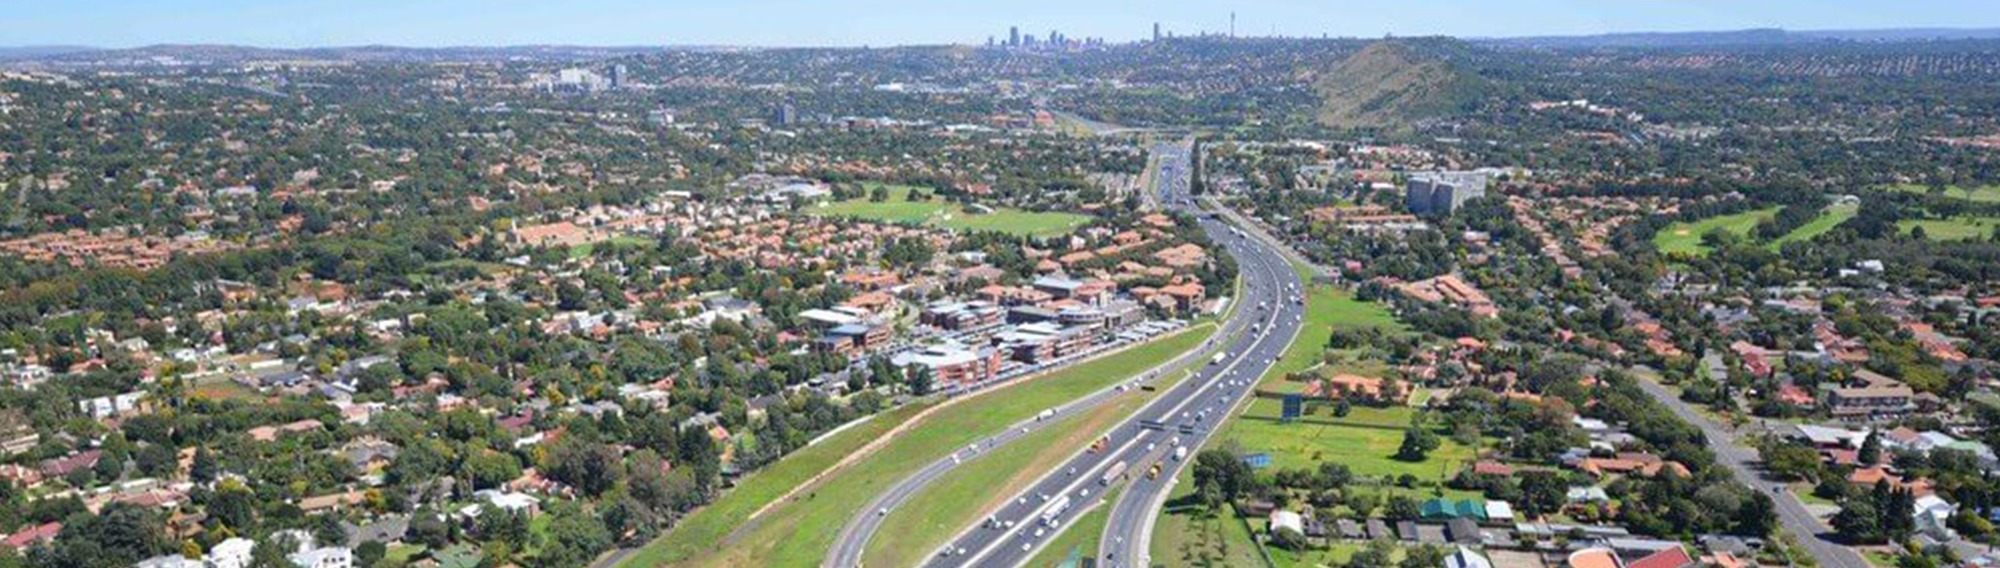 Aerial view of Ekurhuleni showcasing residential areas alongside the highway with Johannesburg skyline in the distance.